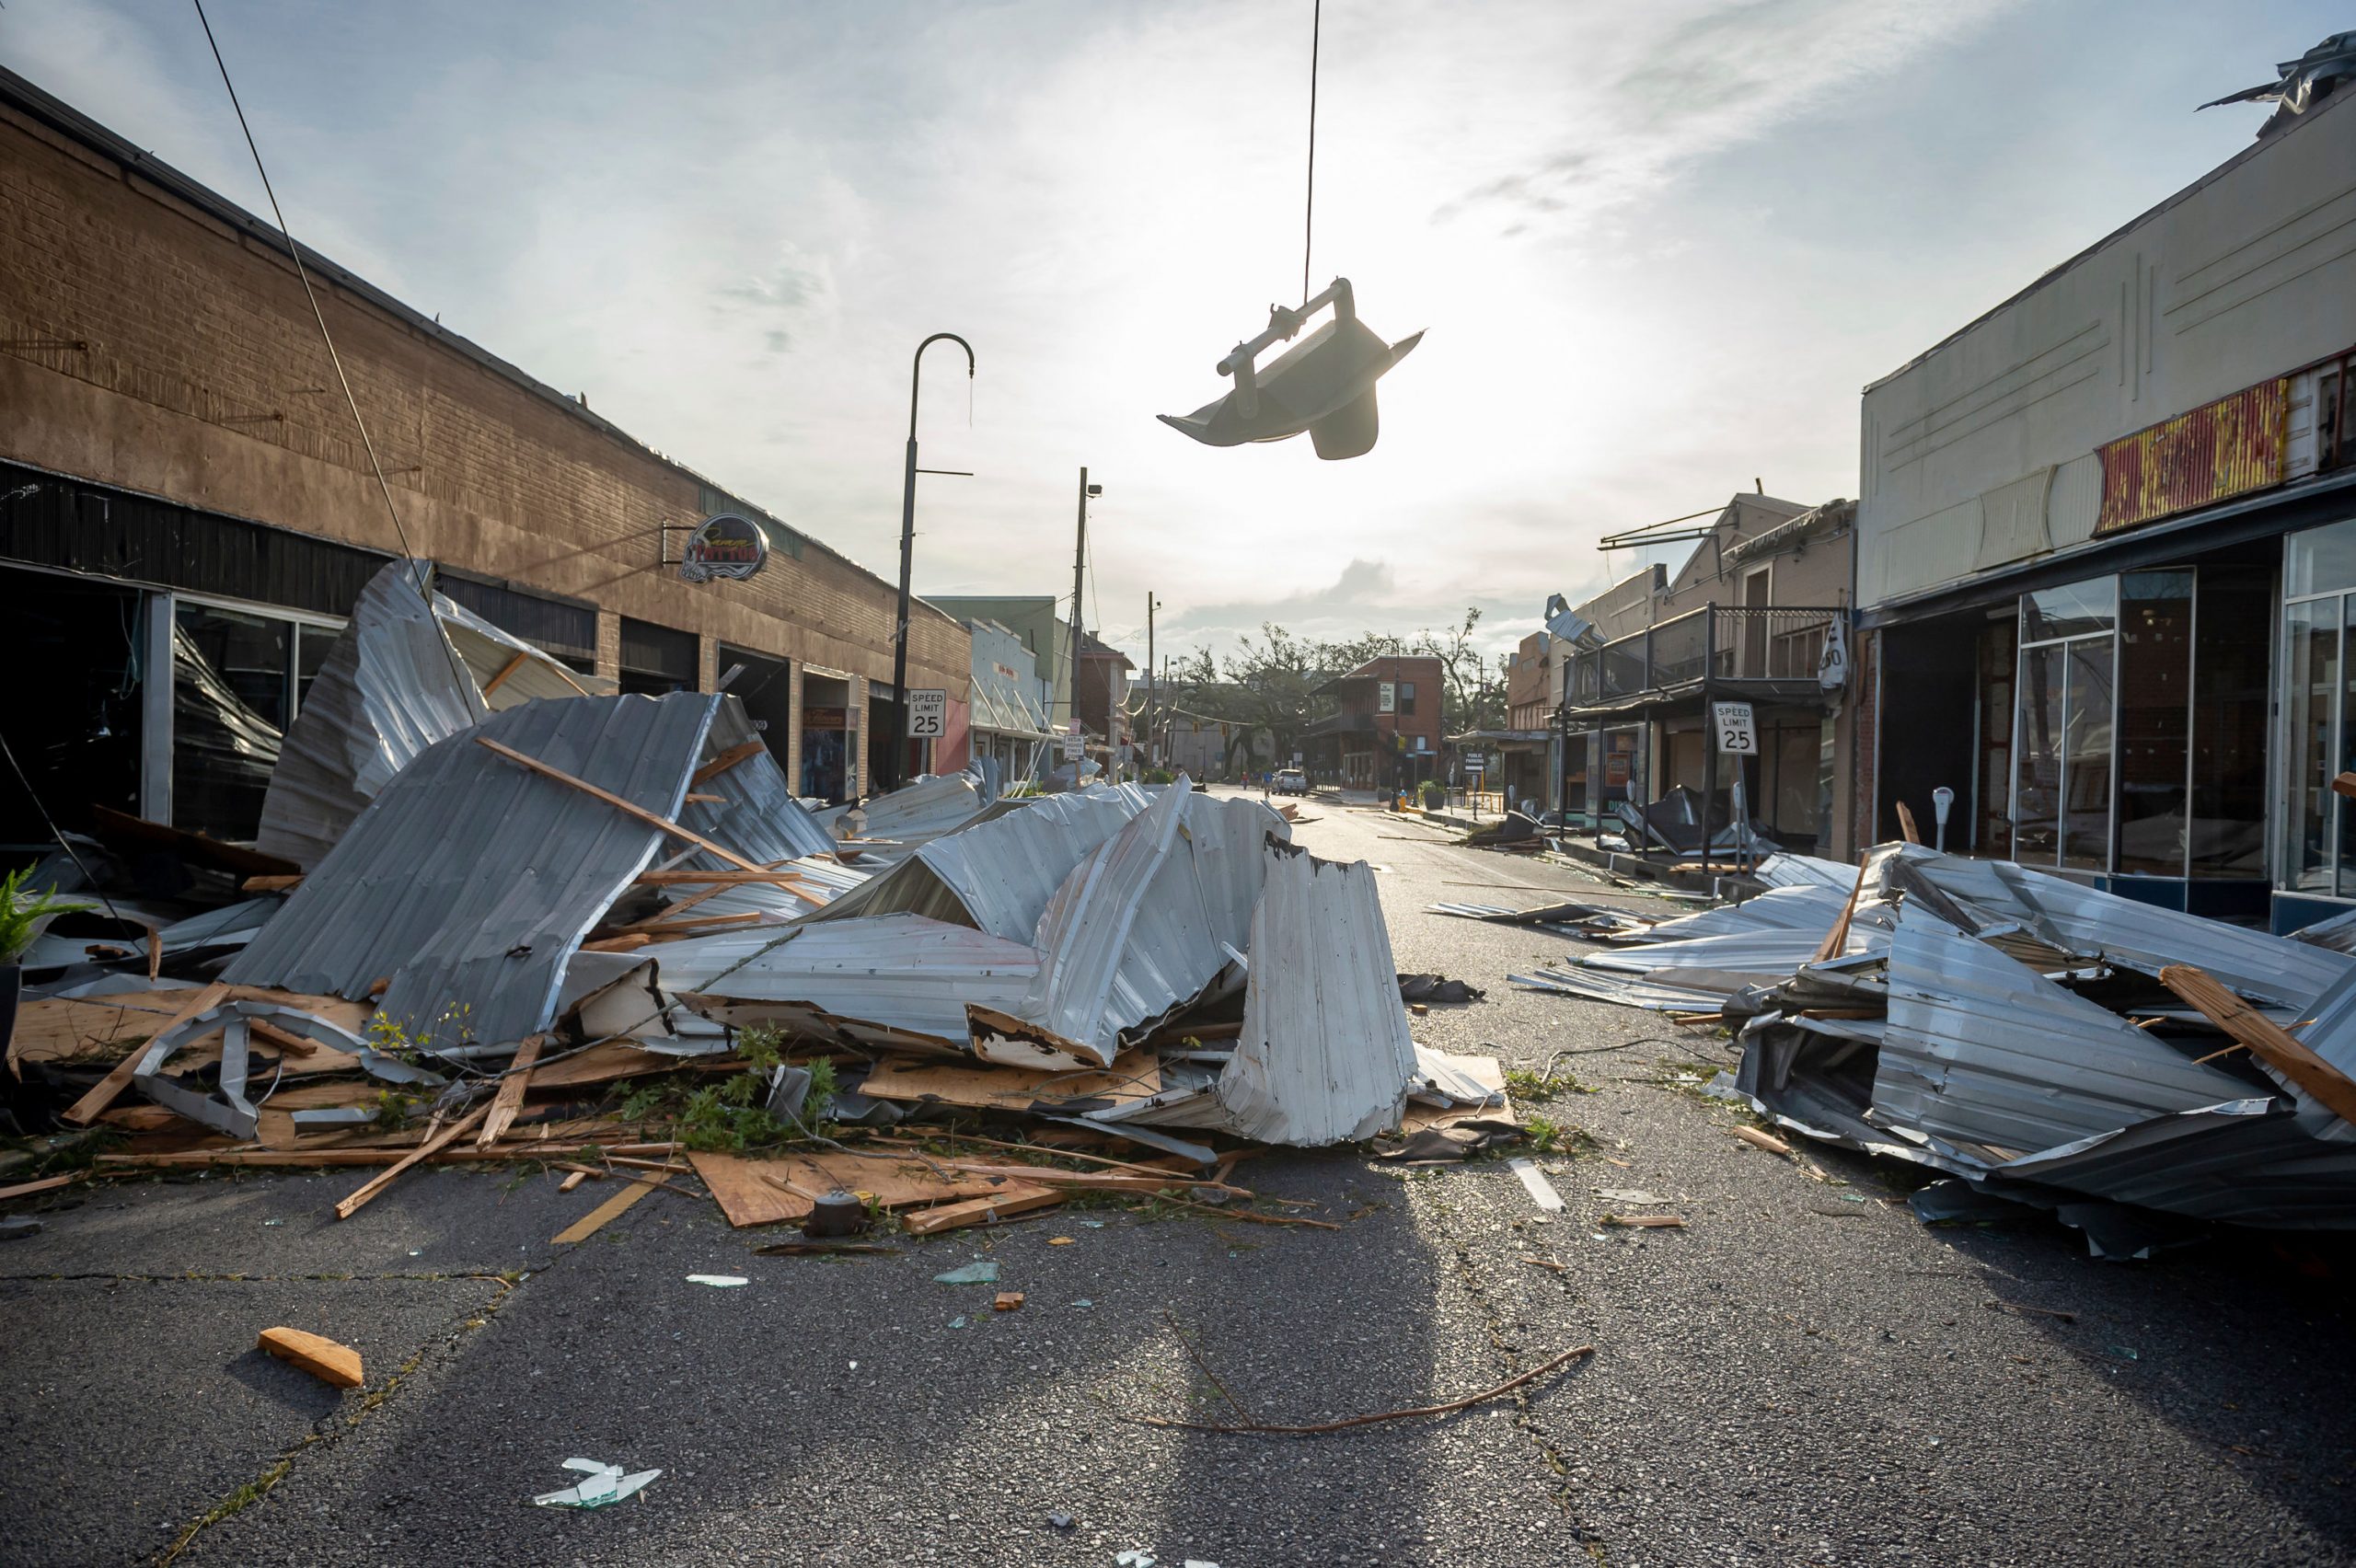 Hit by Hurricane Ida, New Orleans faces weeks without power. Here’s why